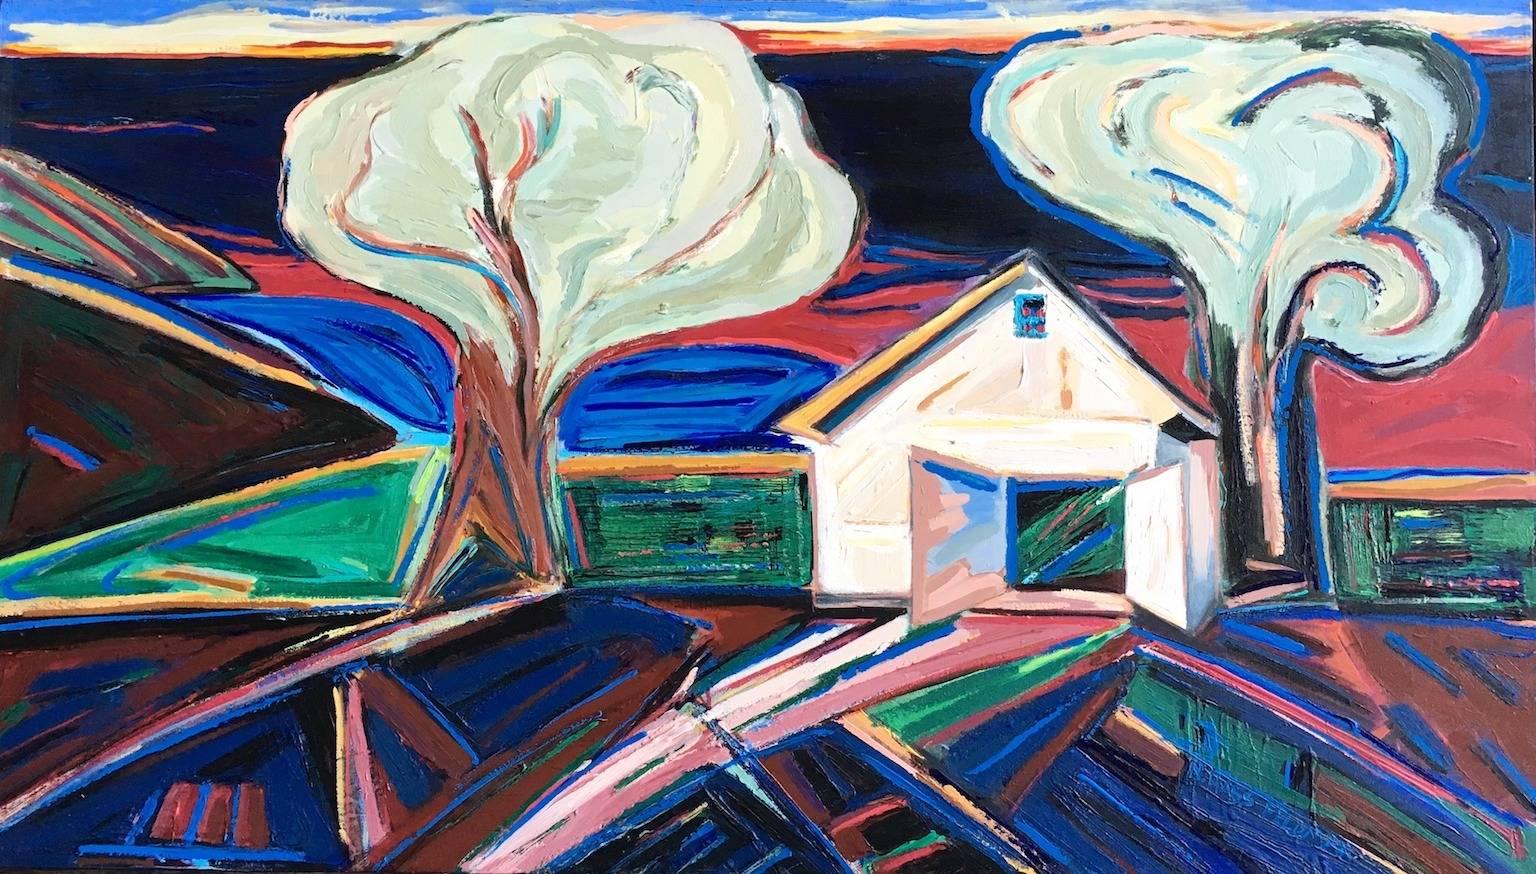 "Boat House", expressionist, landscape, blues, greens, reds, acrylic painting - Painting by Nan Hass Feldman